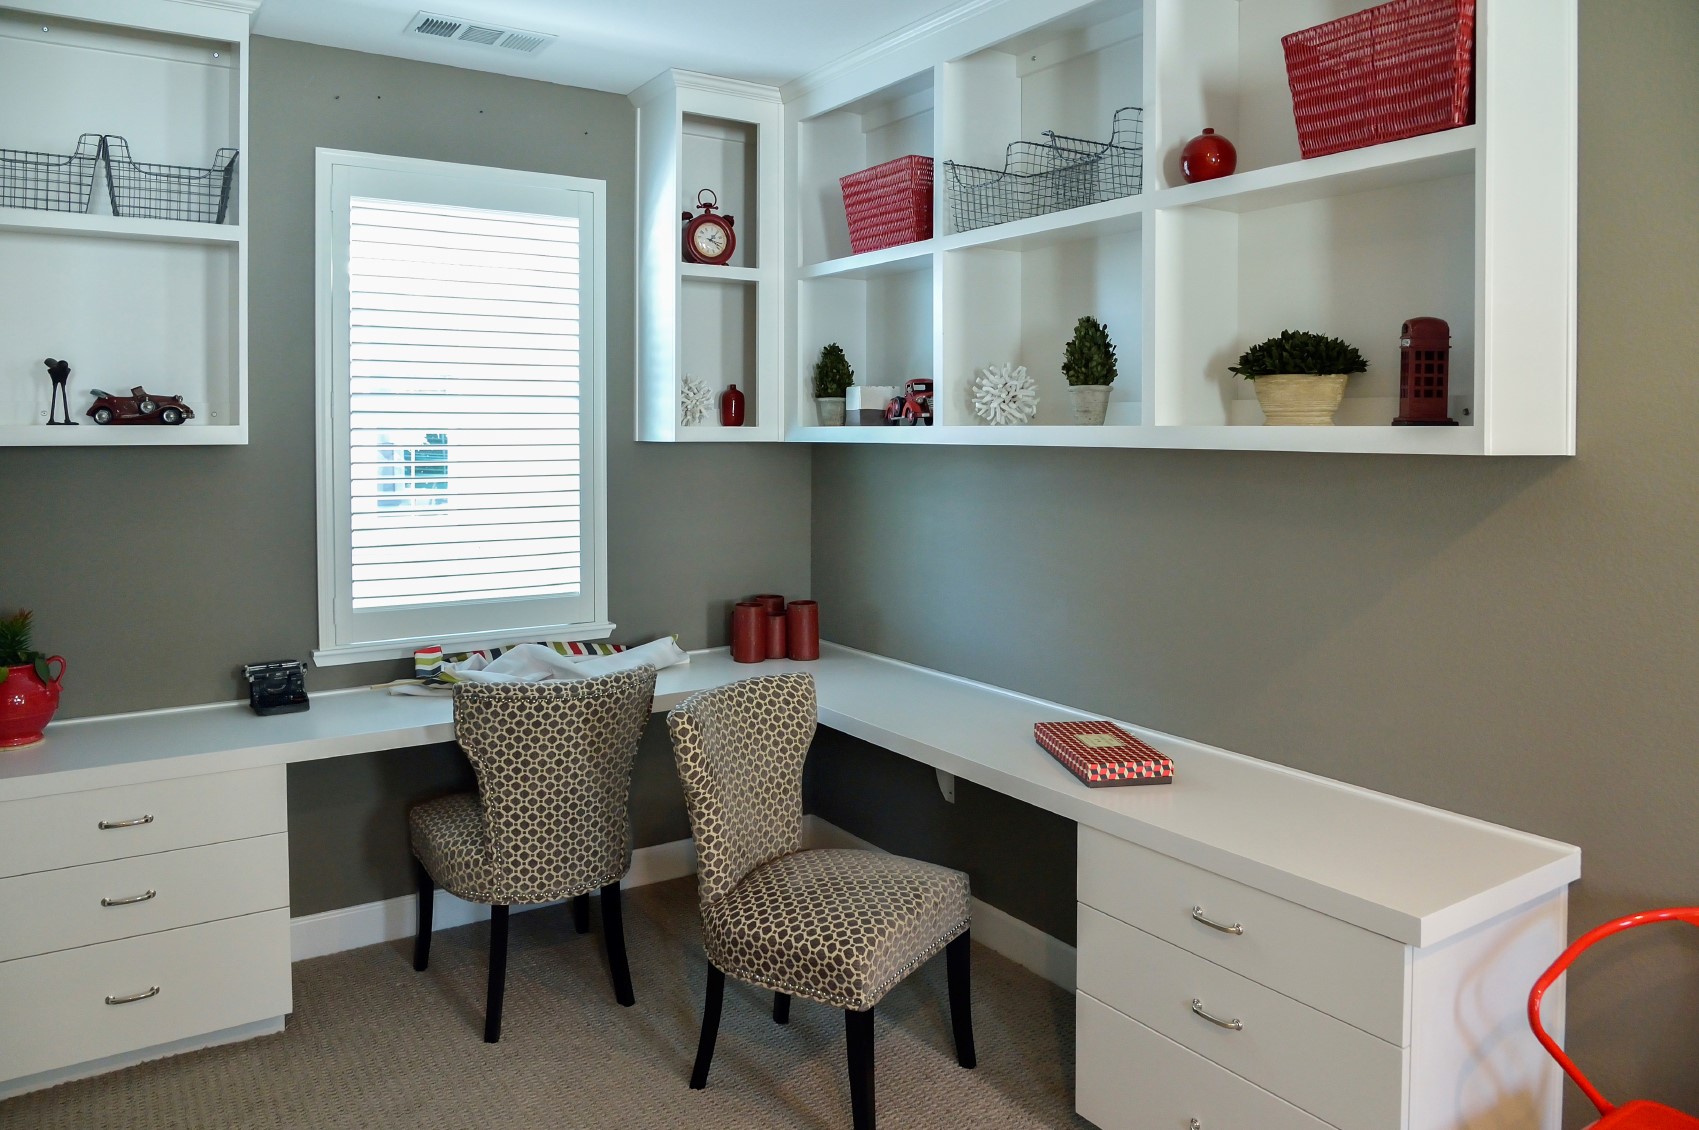 Use a Professional Organizer for Your Home Office